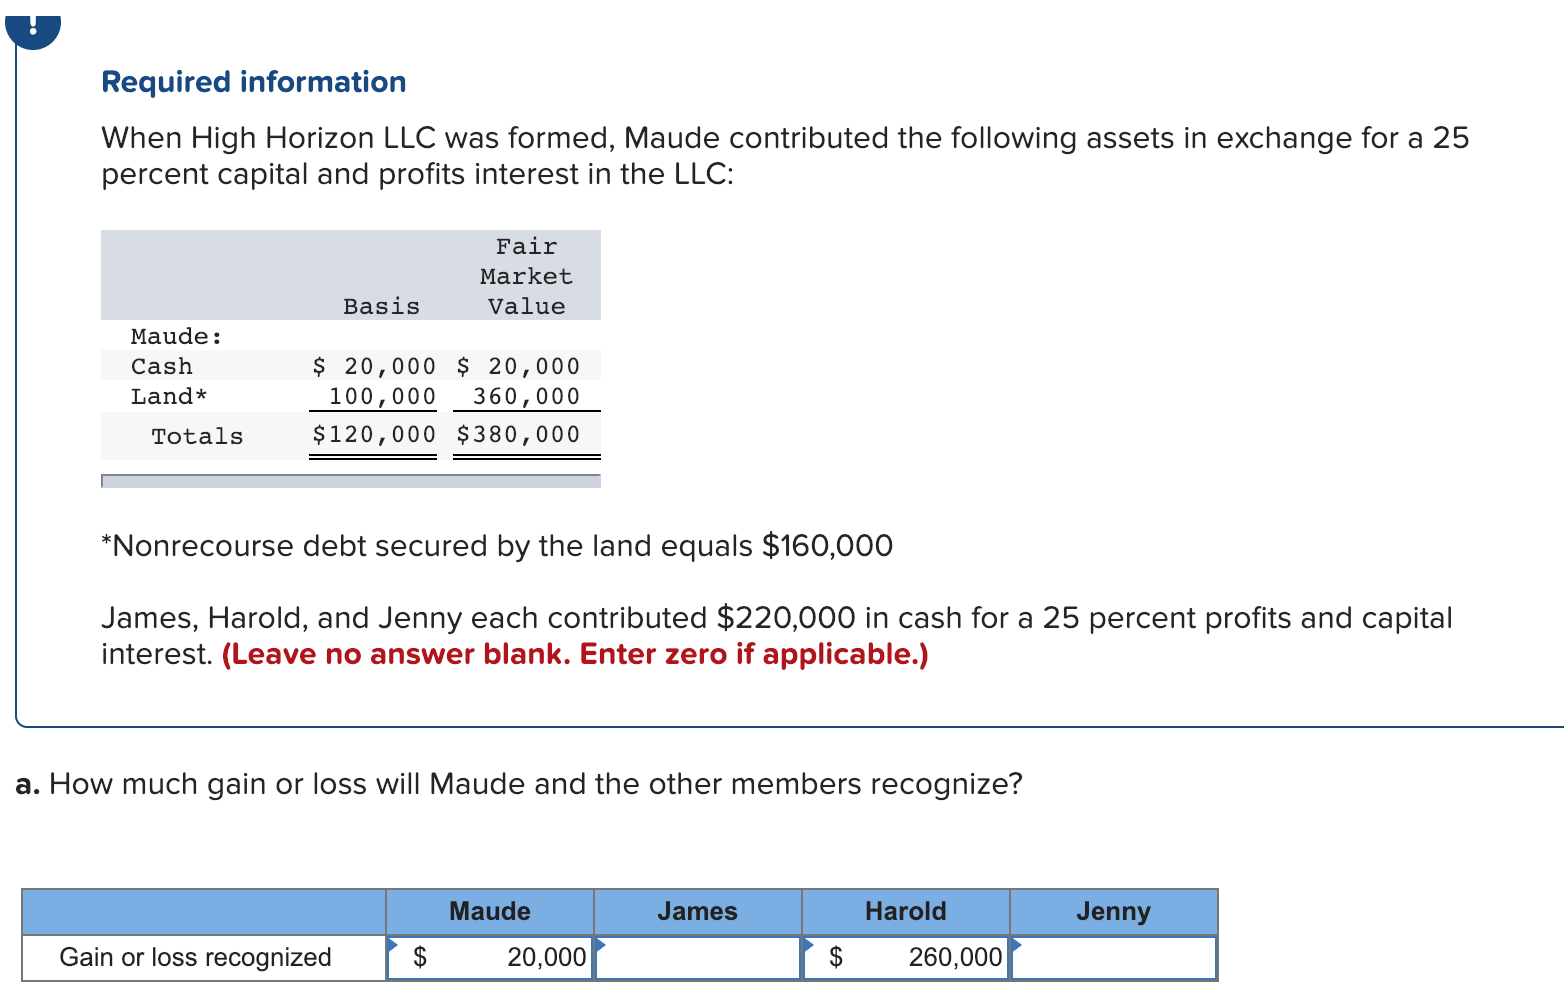 Required information
When High Horizon LLC was formed, Maude contributed the following assets in exchange for a 25
percent capital and profits interest in the LLC:
Fair
Market
Value
Basis
Maude:
Cash
Land*
$20,000 20,000
100,000 360,000
Totals$120,000 $380,000
Nonrecourse debt secured by the land equals $160,000
James, Harold, and Jenny each contributed $220,000 in cash for a 25 percent profits and capital
interest. (Leave no answer blank. Enter zero if applicable.)
a. How much gain or loss will Maude and the other members recognize?
Maude
James
Harold
Jenny
Gain or loss recognized
$ 260,000
